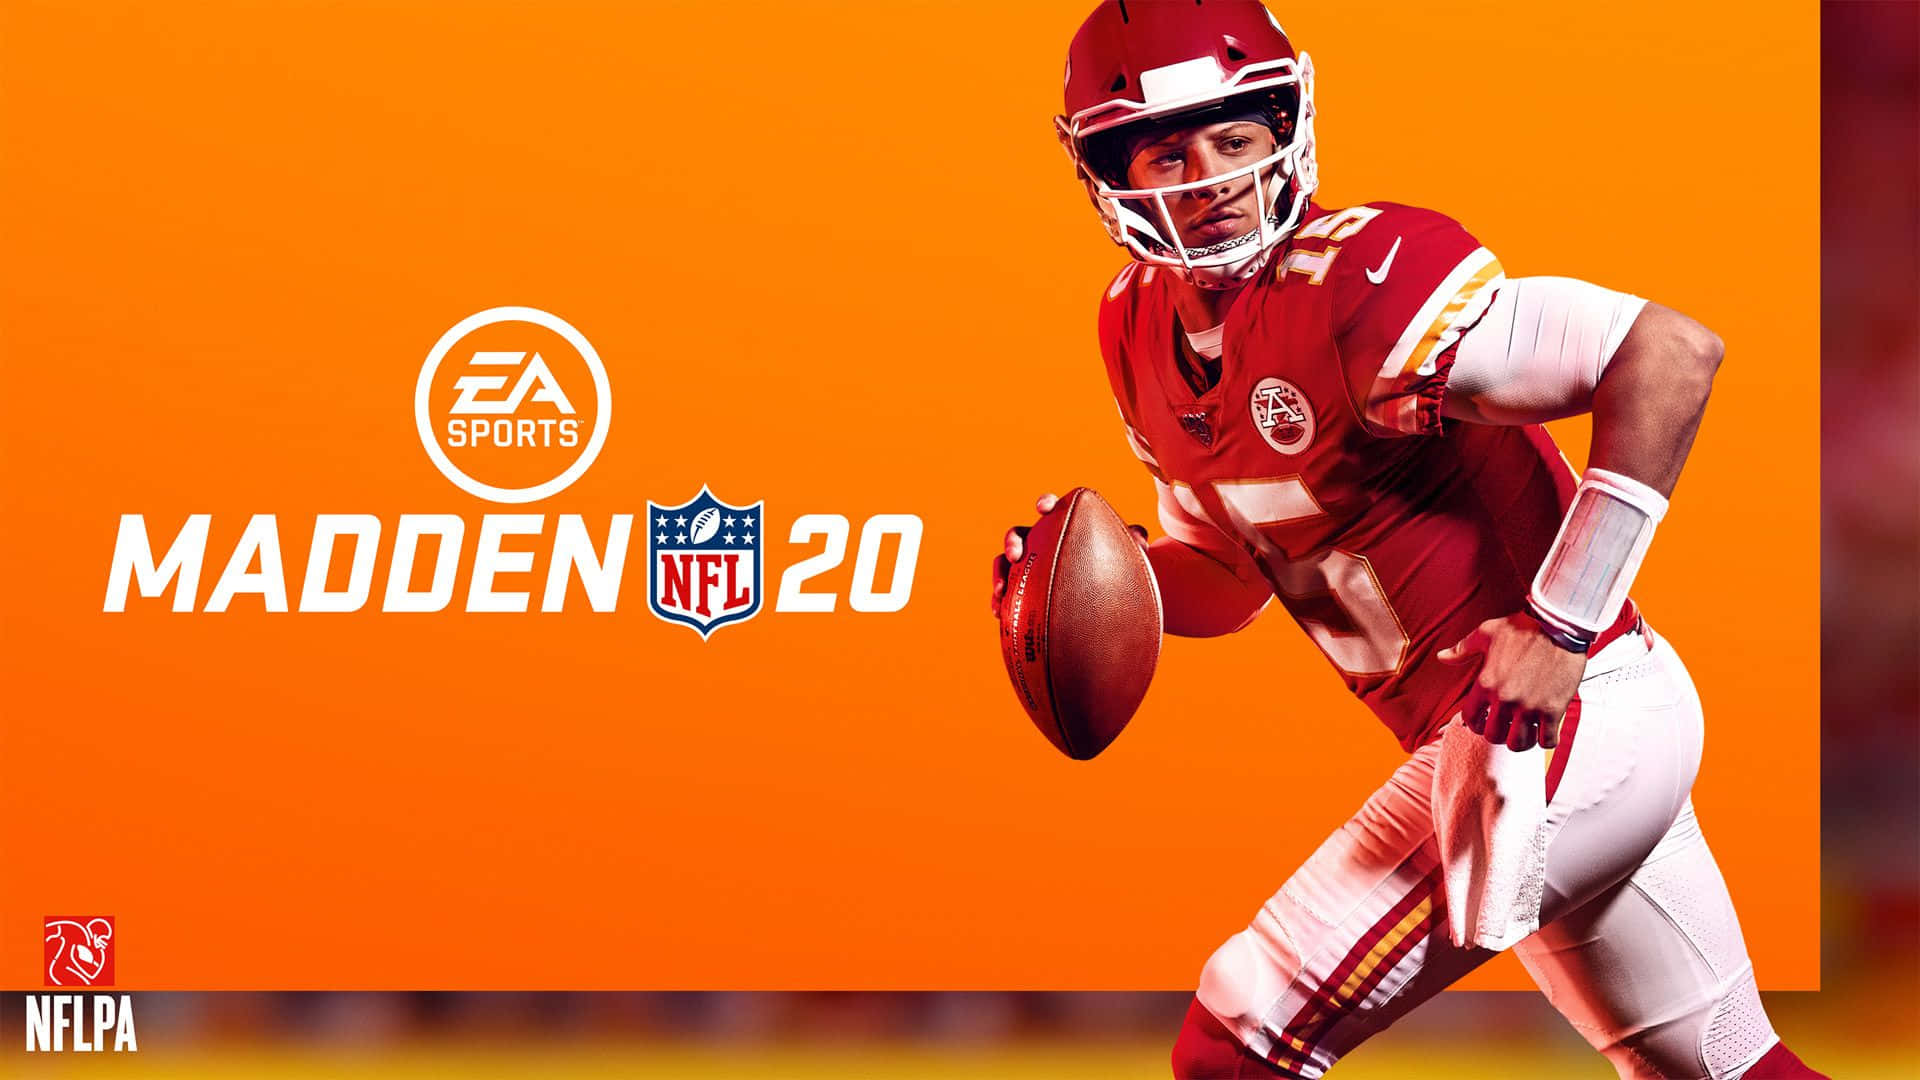 Caption: Exciting action from Madden NFL 22 on the field Wallpaper